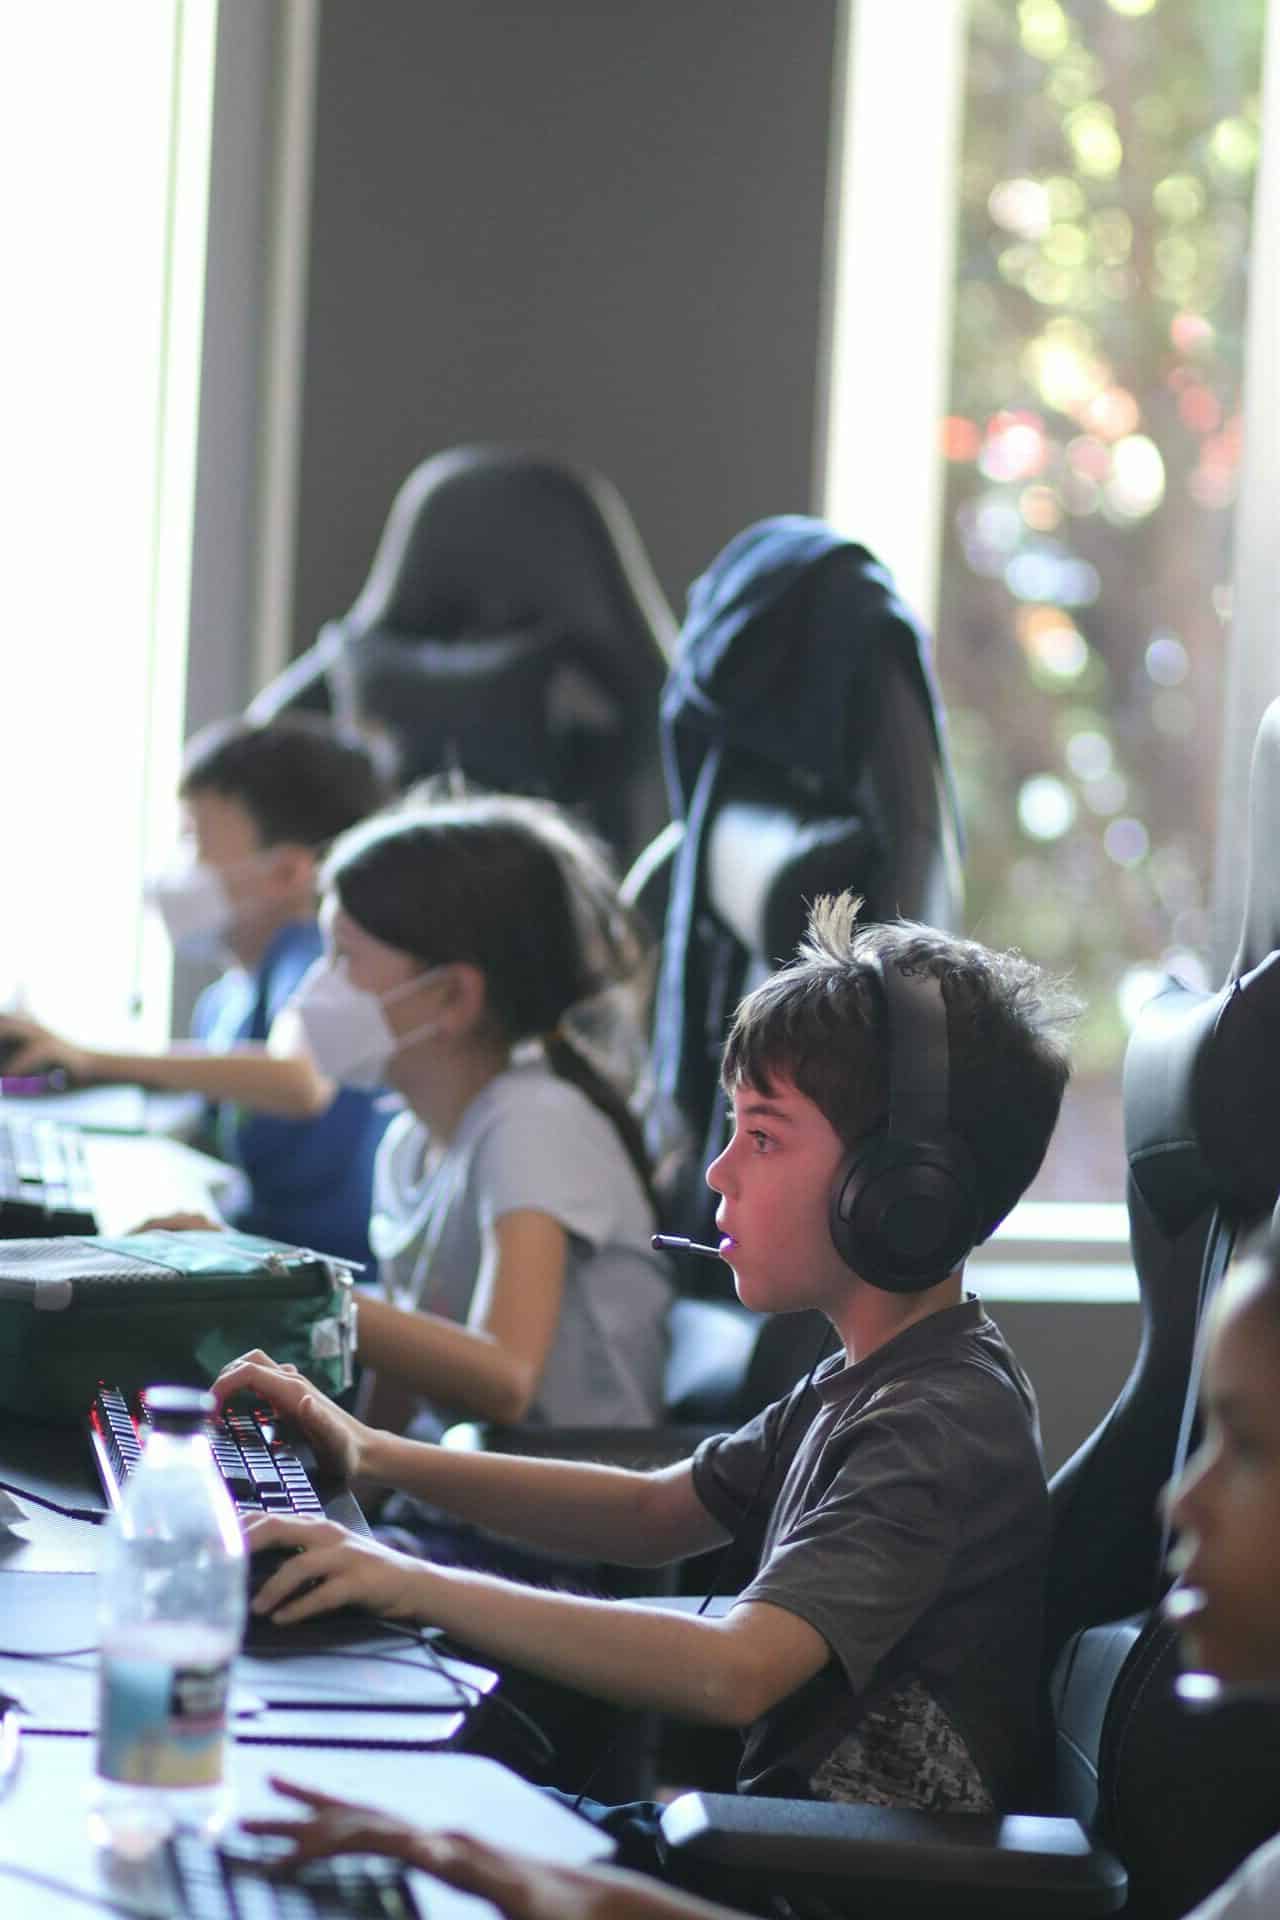 Track out camps at Triangle Esports Kid coding